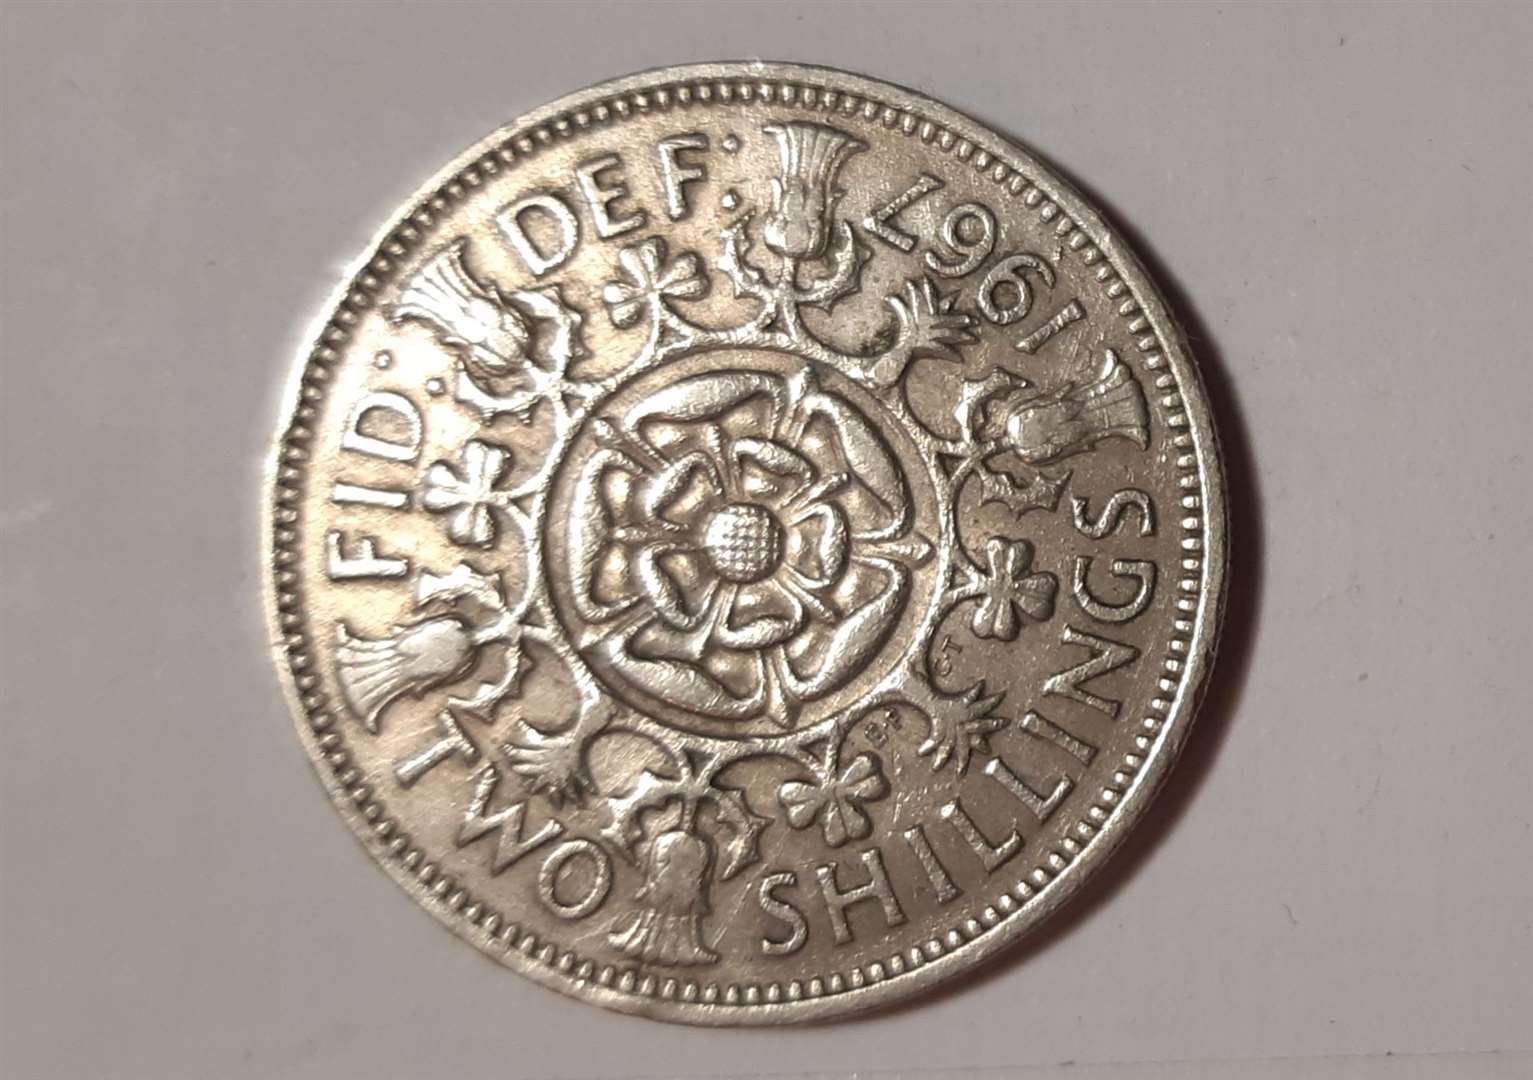 Two shillings. The last pre-decimal coins were minted in 1967